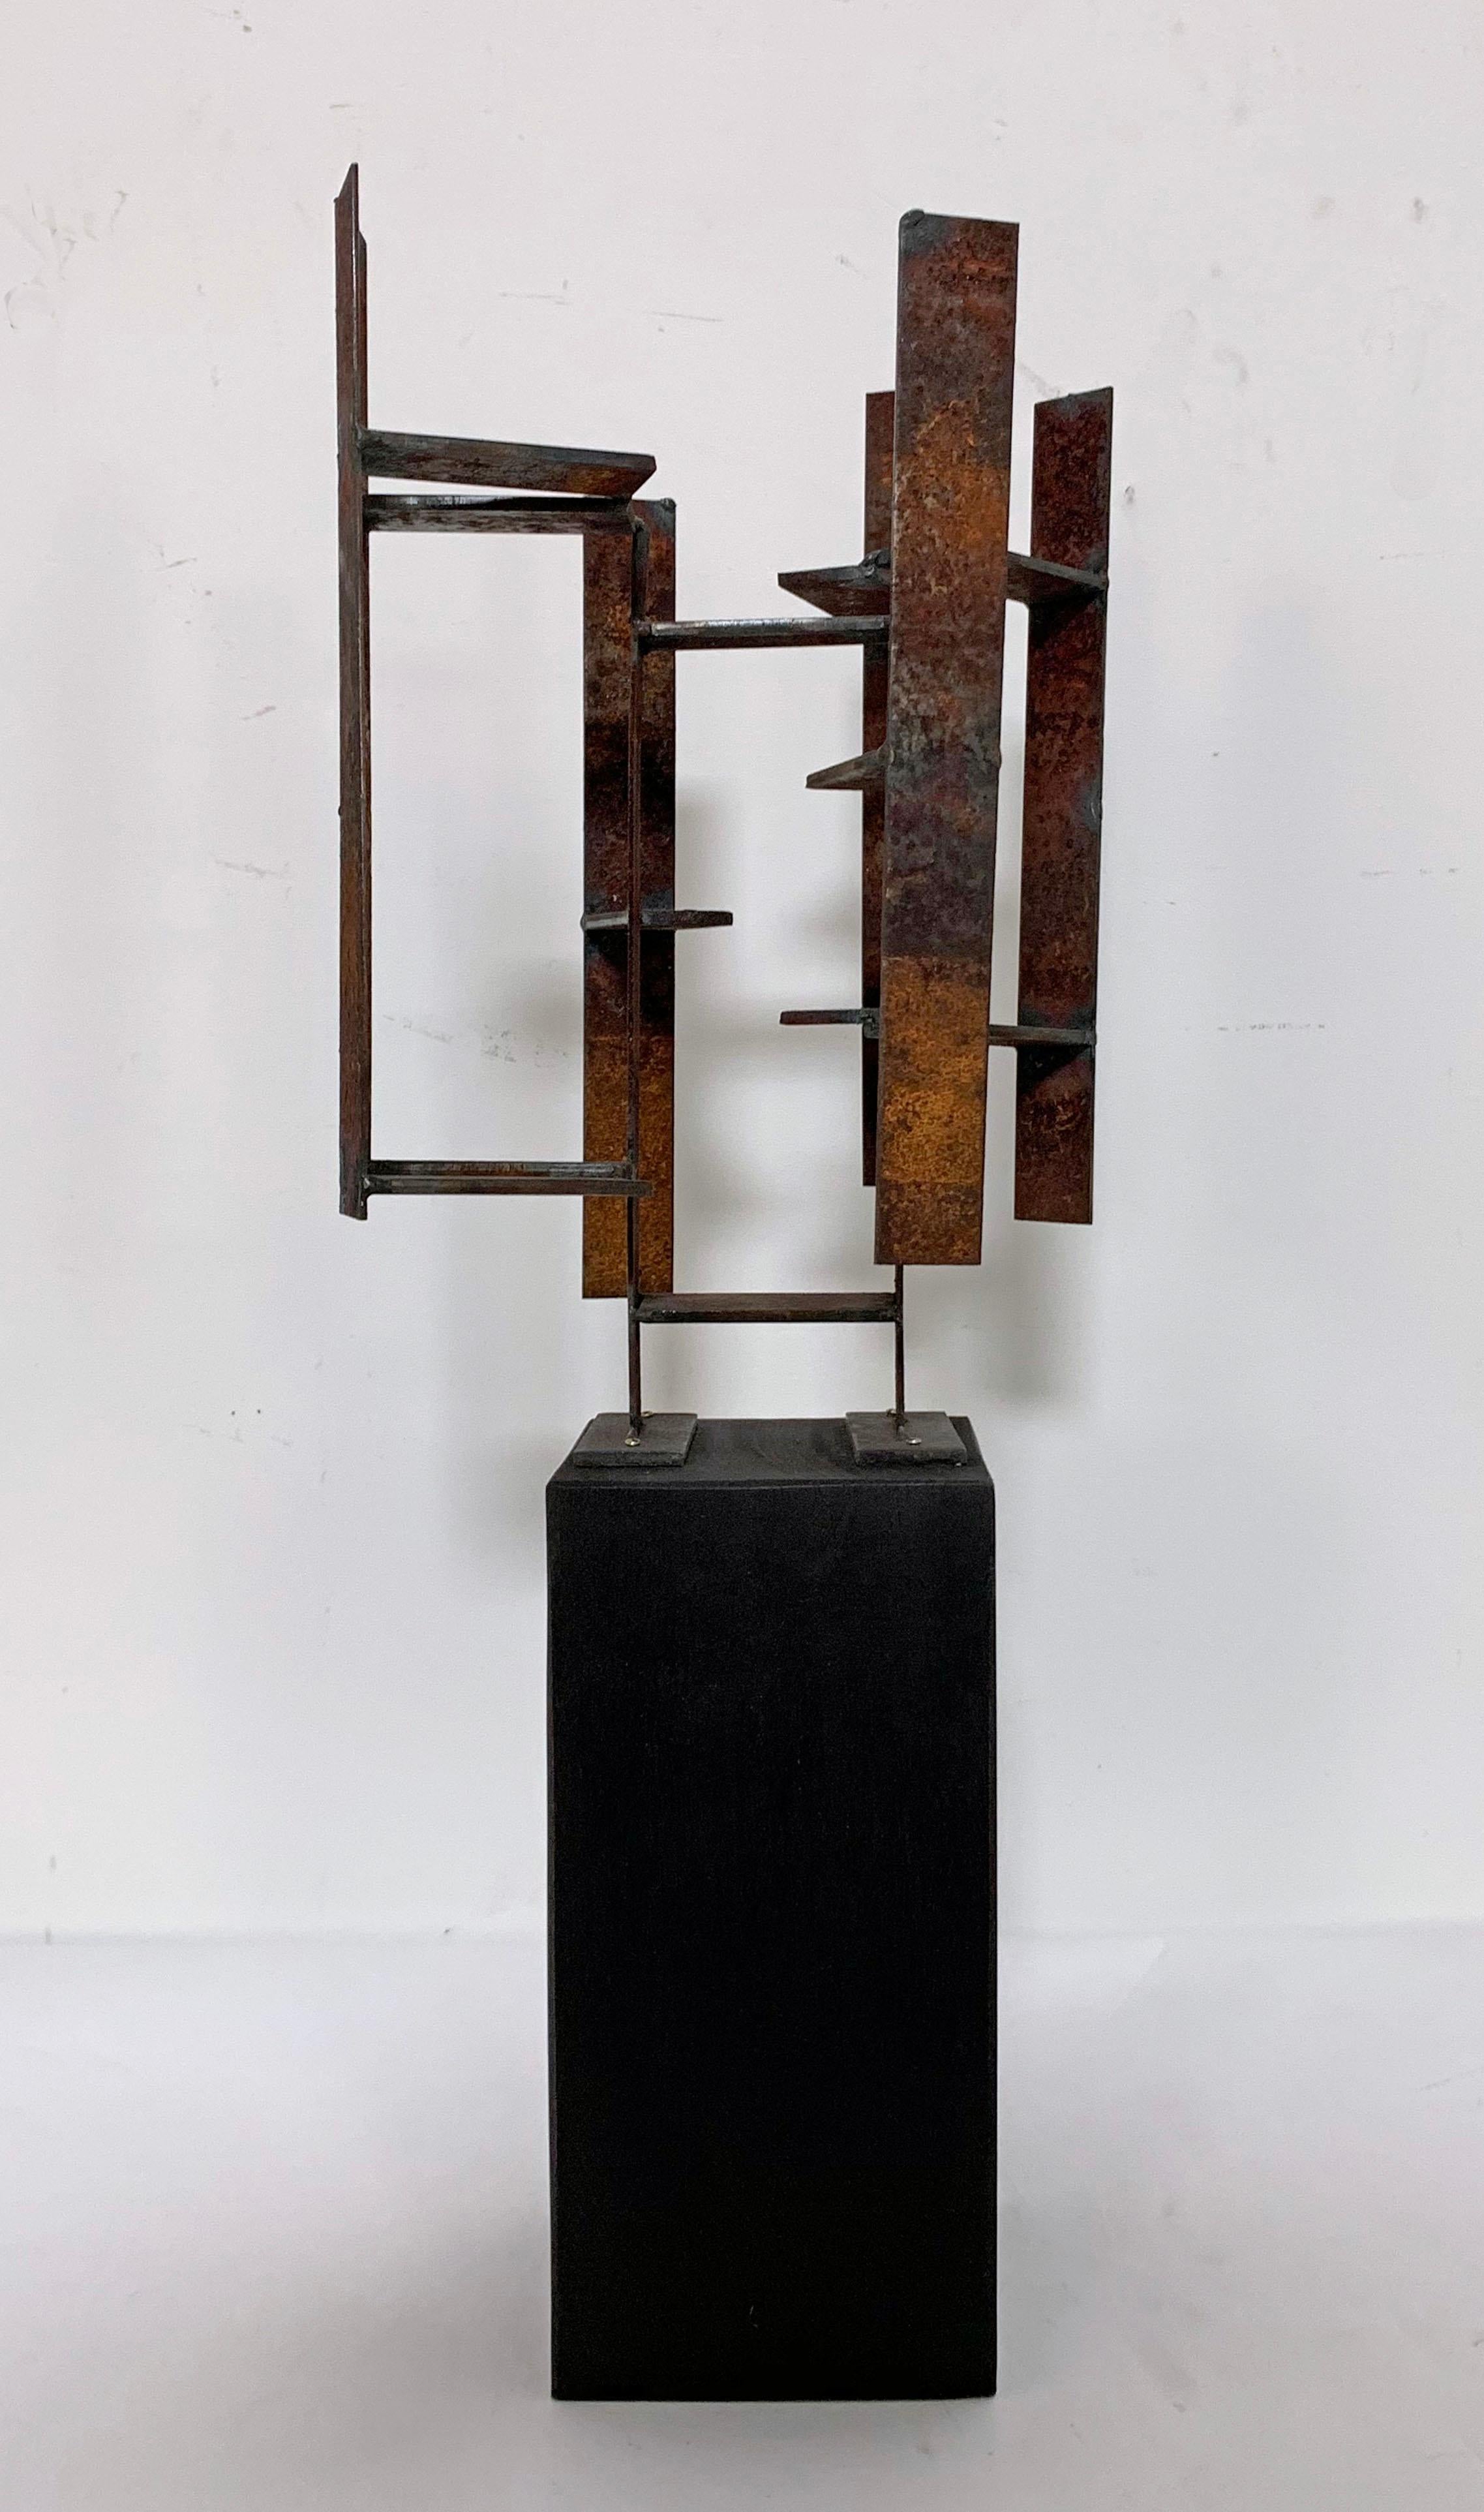 Late 20th Century Mid-Century Modern Abstract Brutalist Welded Steel Sculpture by John Livermore For Sale